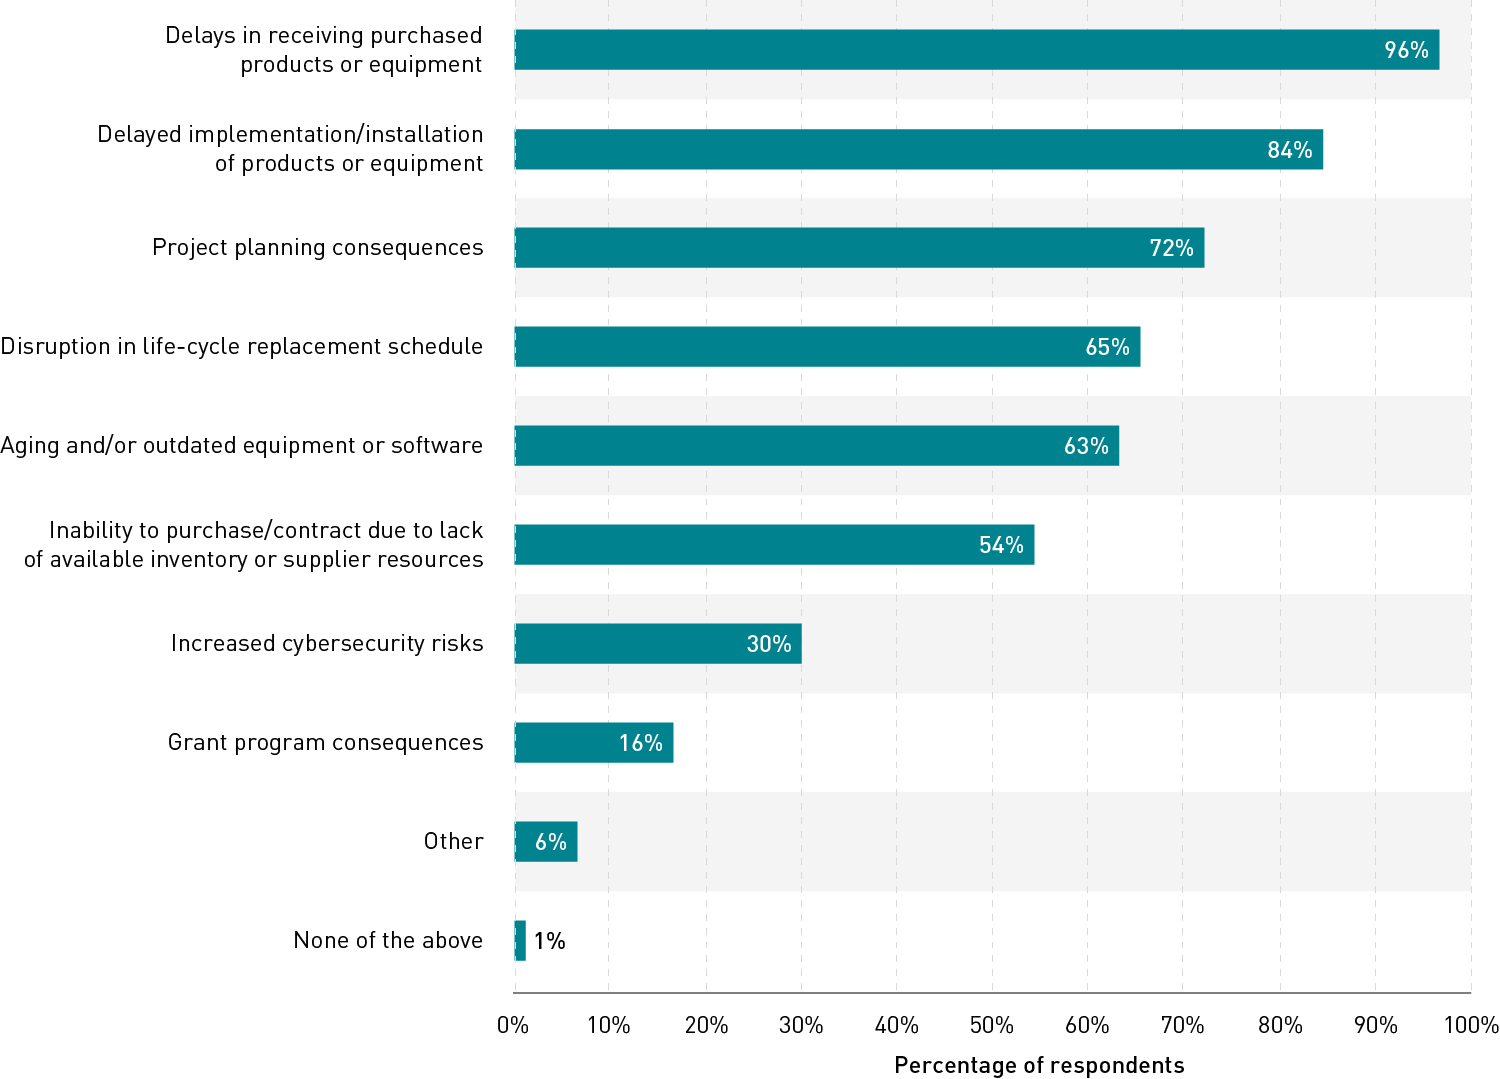 Bar chart of ten response options to the question, 'Which of the following challenges is your IT unit currently experiencing due to hardware or software supply-chain disruptions?' From most- to least-selected, the response options are delays in receiving purchased products or equipment, delayed implementation or installation of products or equipment, project planning consequences, disruption in life-cycle replacement schedule, aging or outdated equipment or software, inability to purchase or contract due to lack of available inventory or supplier resources, increased cybersecurity risks, grant program consequences, other, and none of the above.